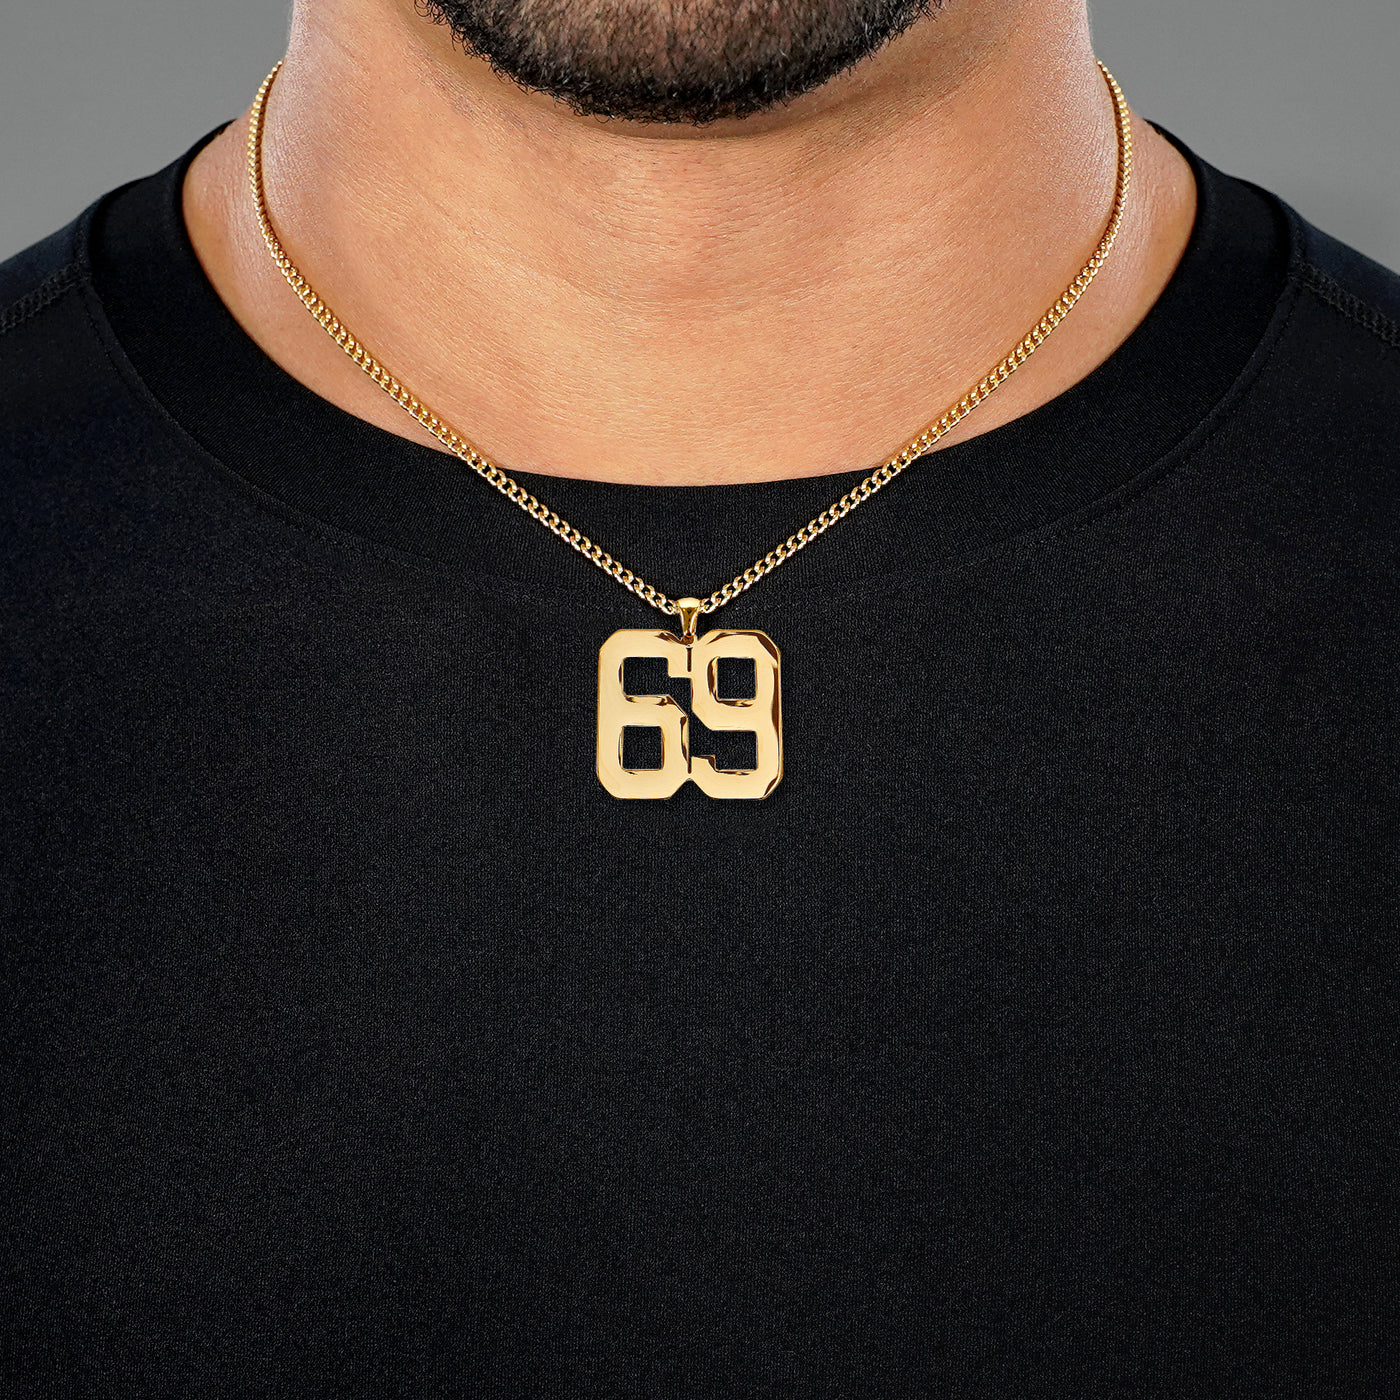 69 Number Pendant with Chain Necklace - Gold Plated Stainless Steel